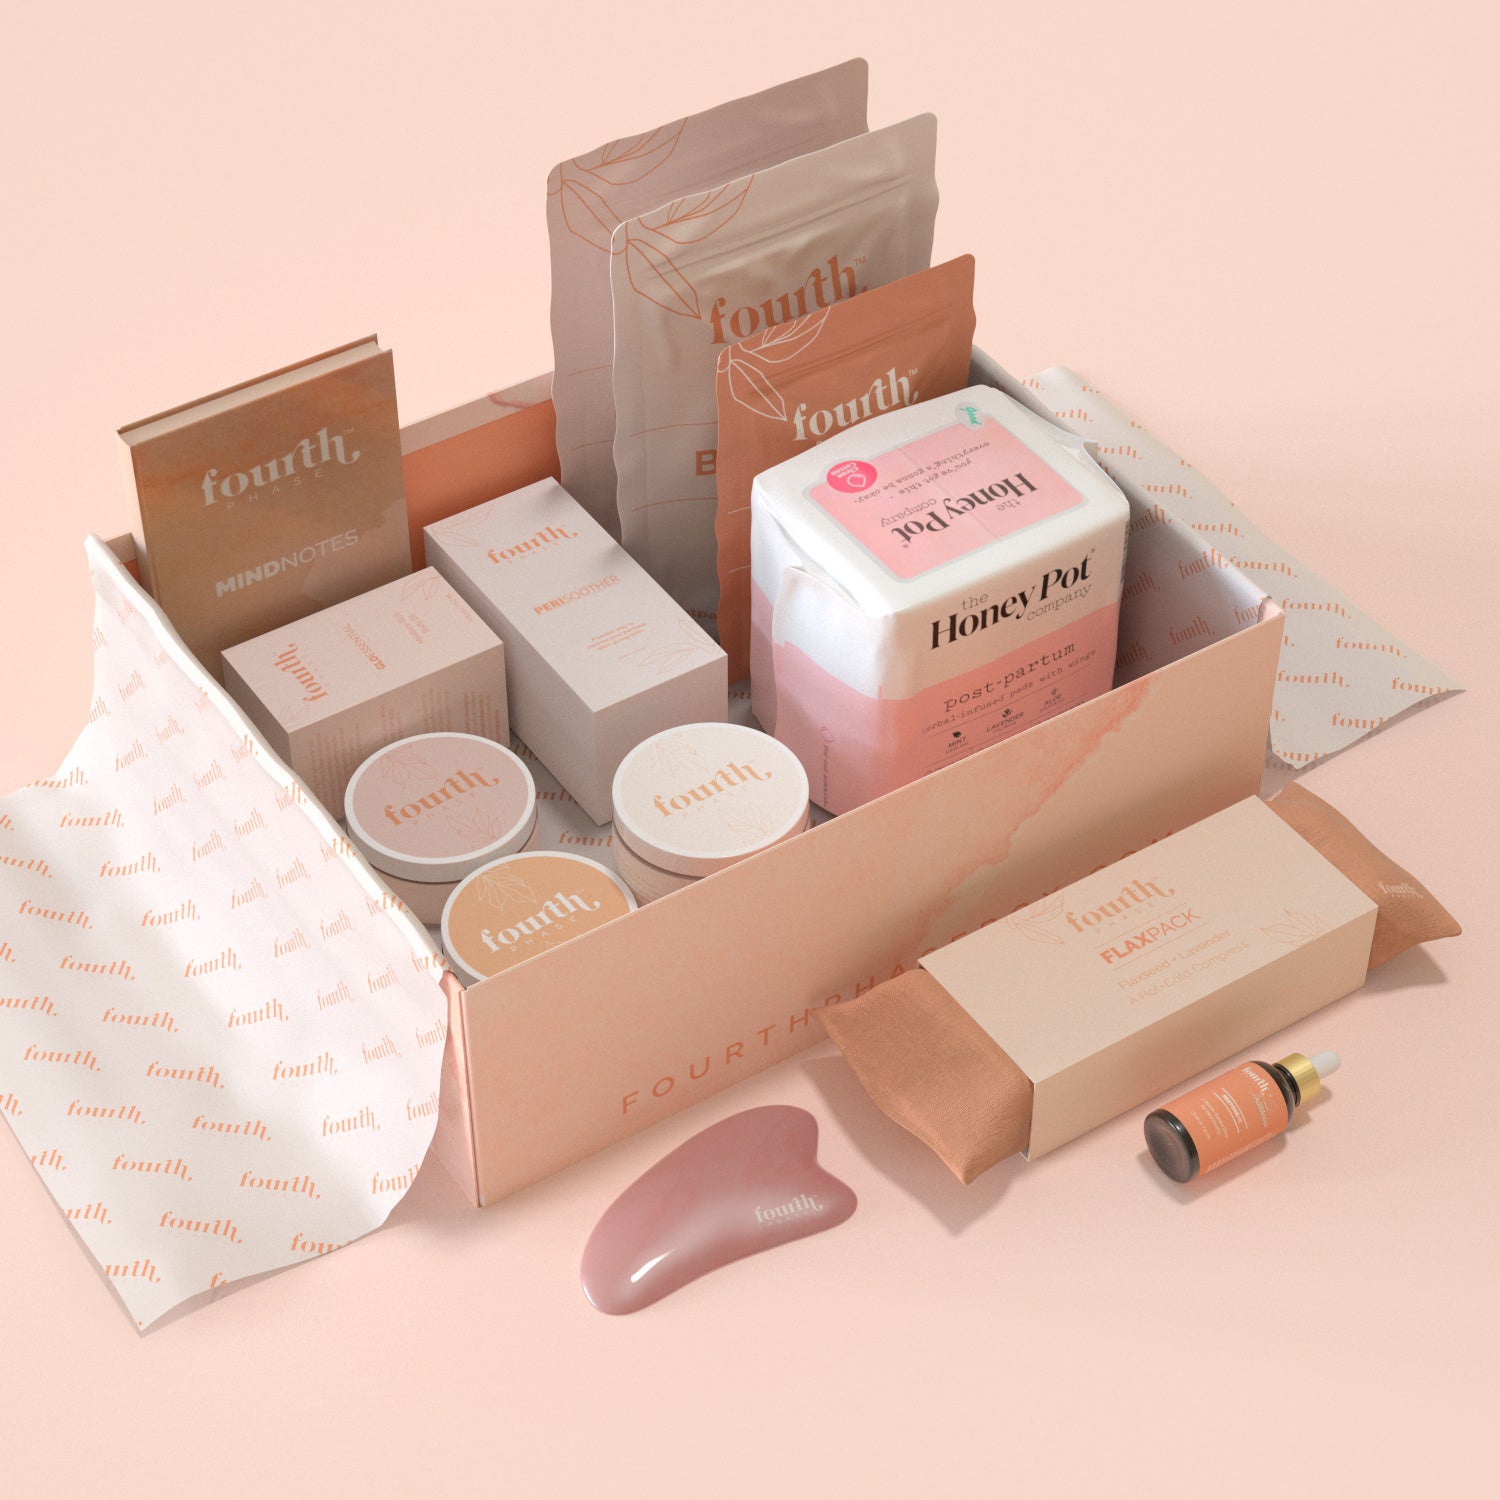 A Black-Owned Care Box for Moms Post Delivery? Yes, Please!